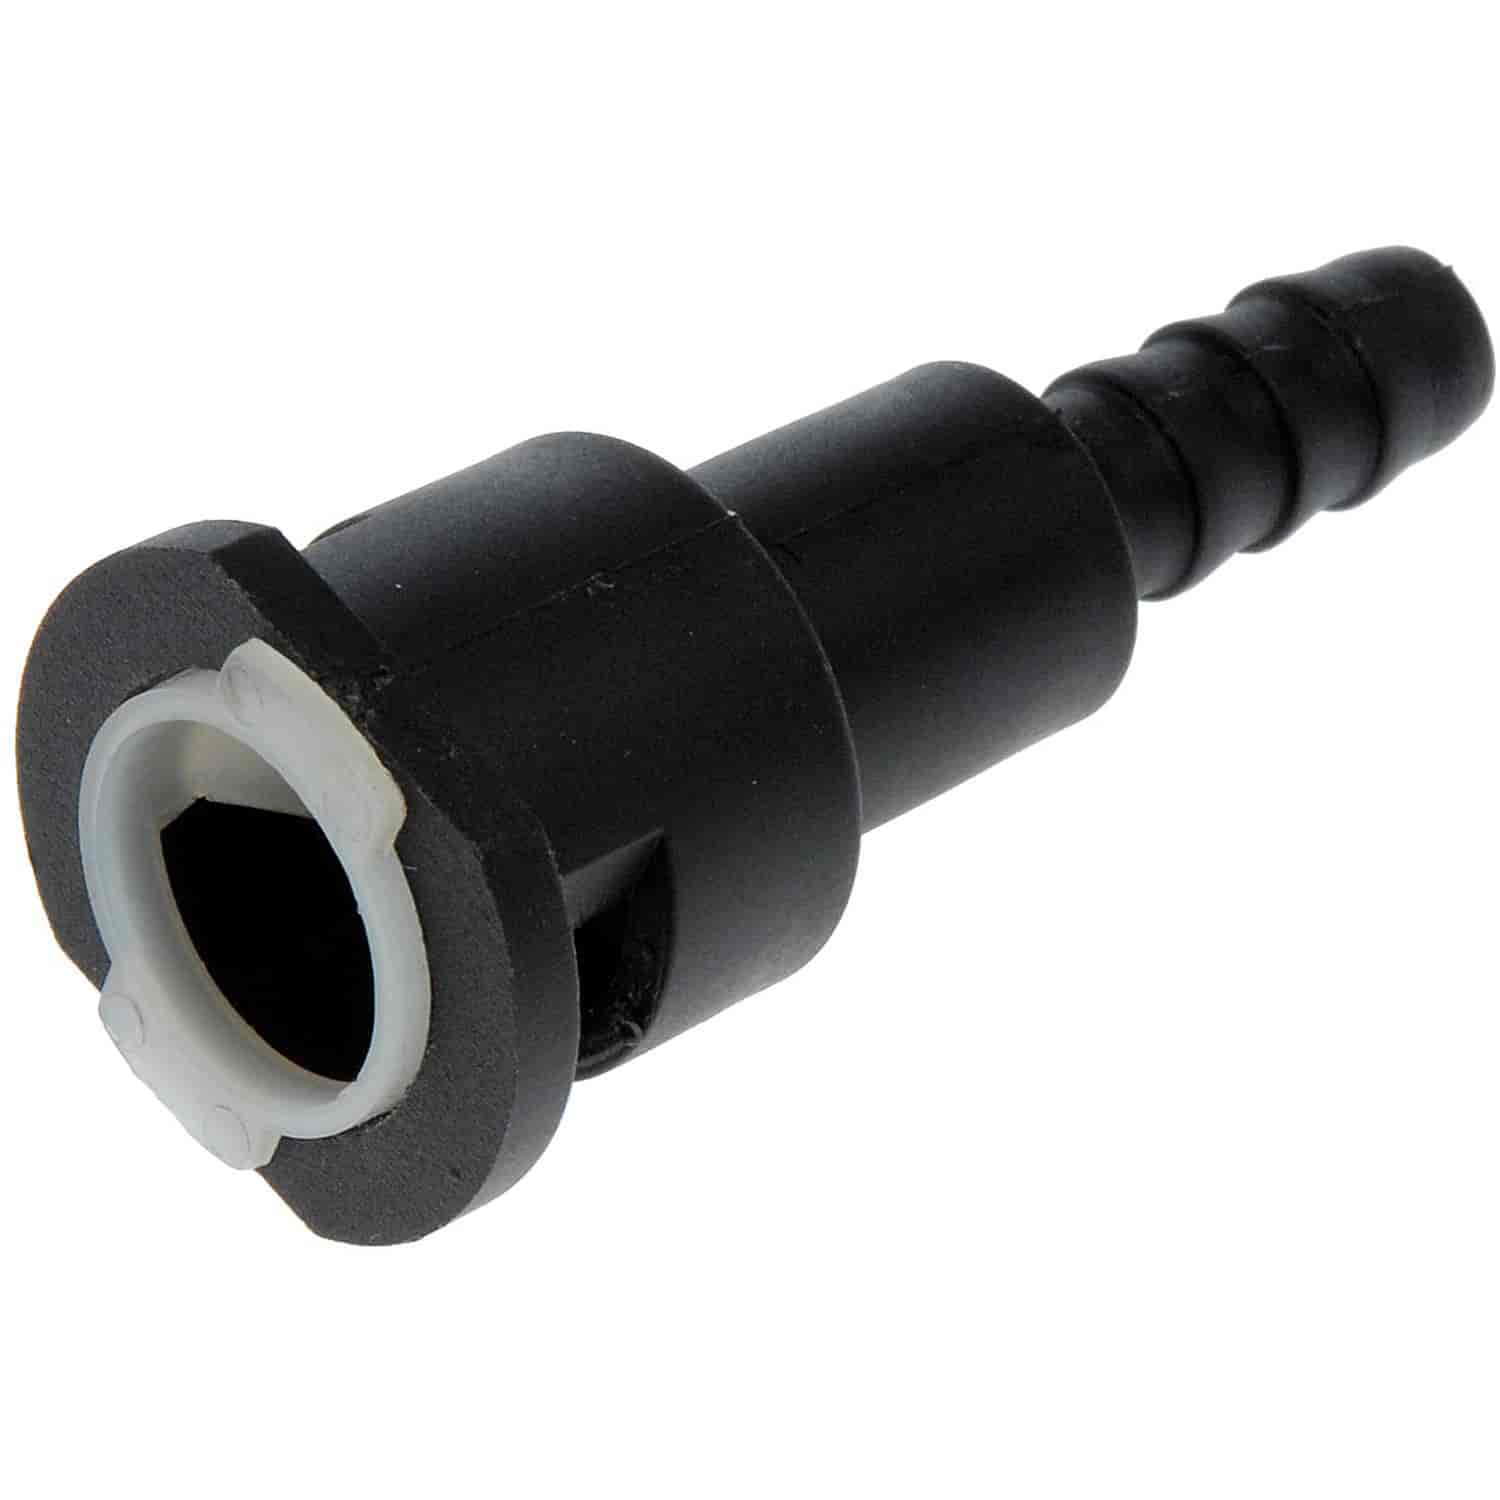 Fuel Line Quick Connectors Straight Adapts 1/4" Steel to 5/16" (8 mm) Nylon Tubing